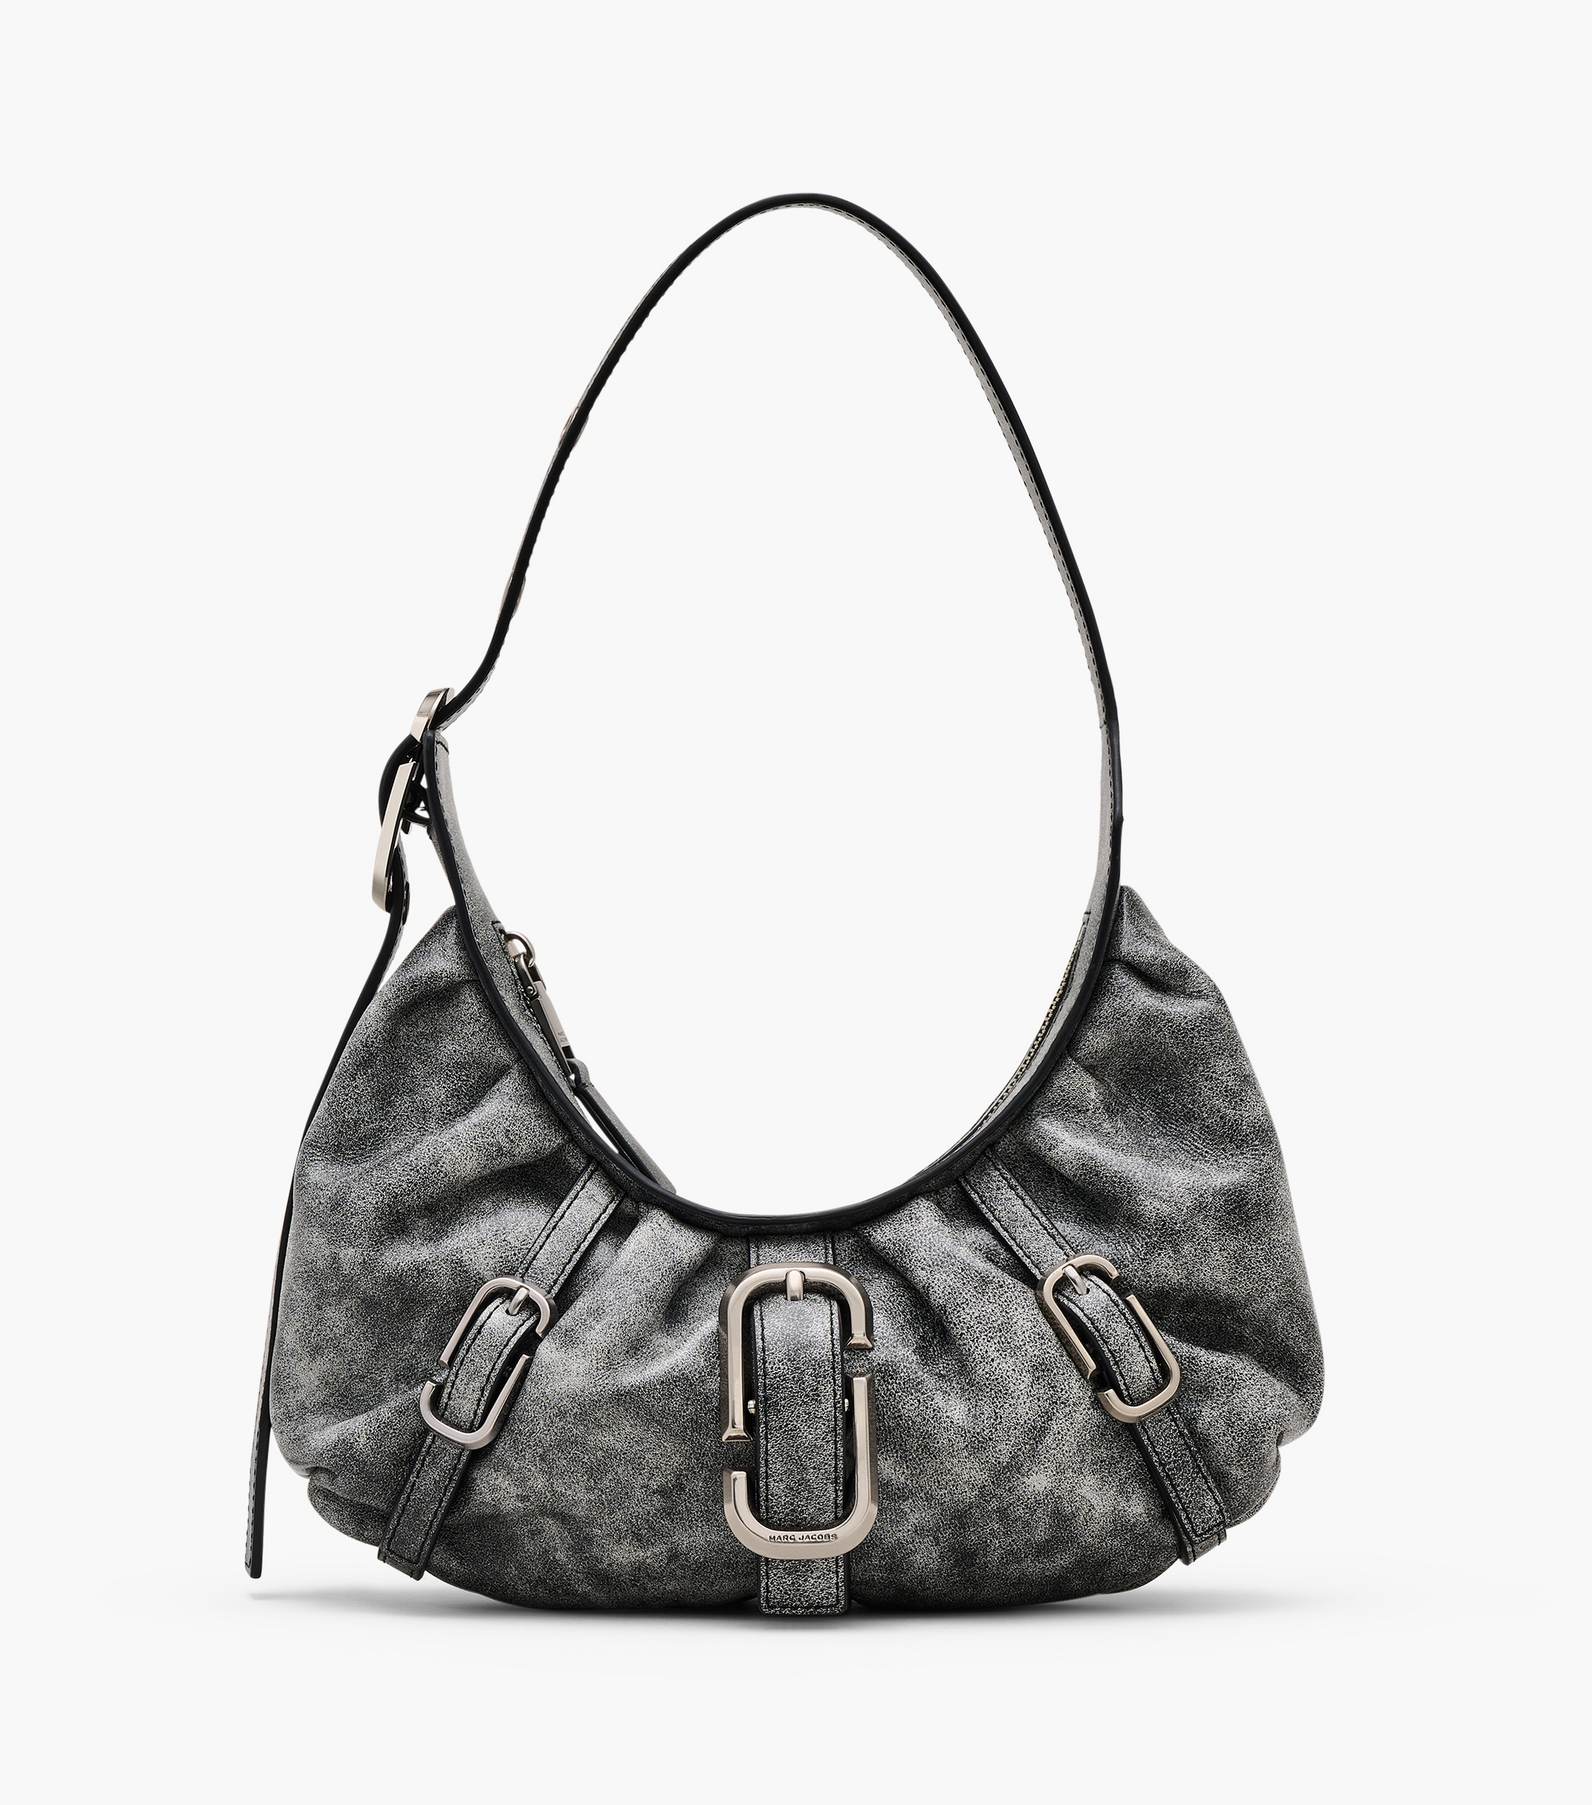 THE DISTRESSED LEATHER BUCKLE J MARC CRESCENT